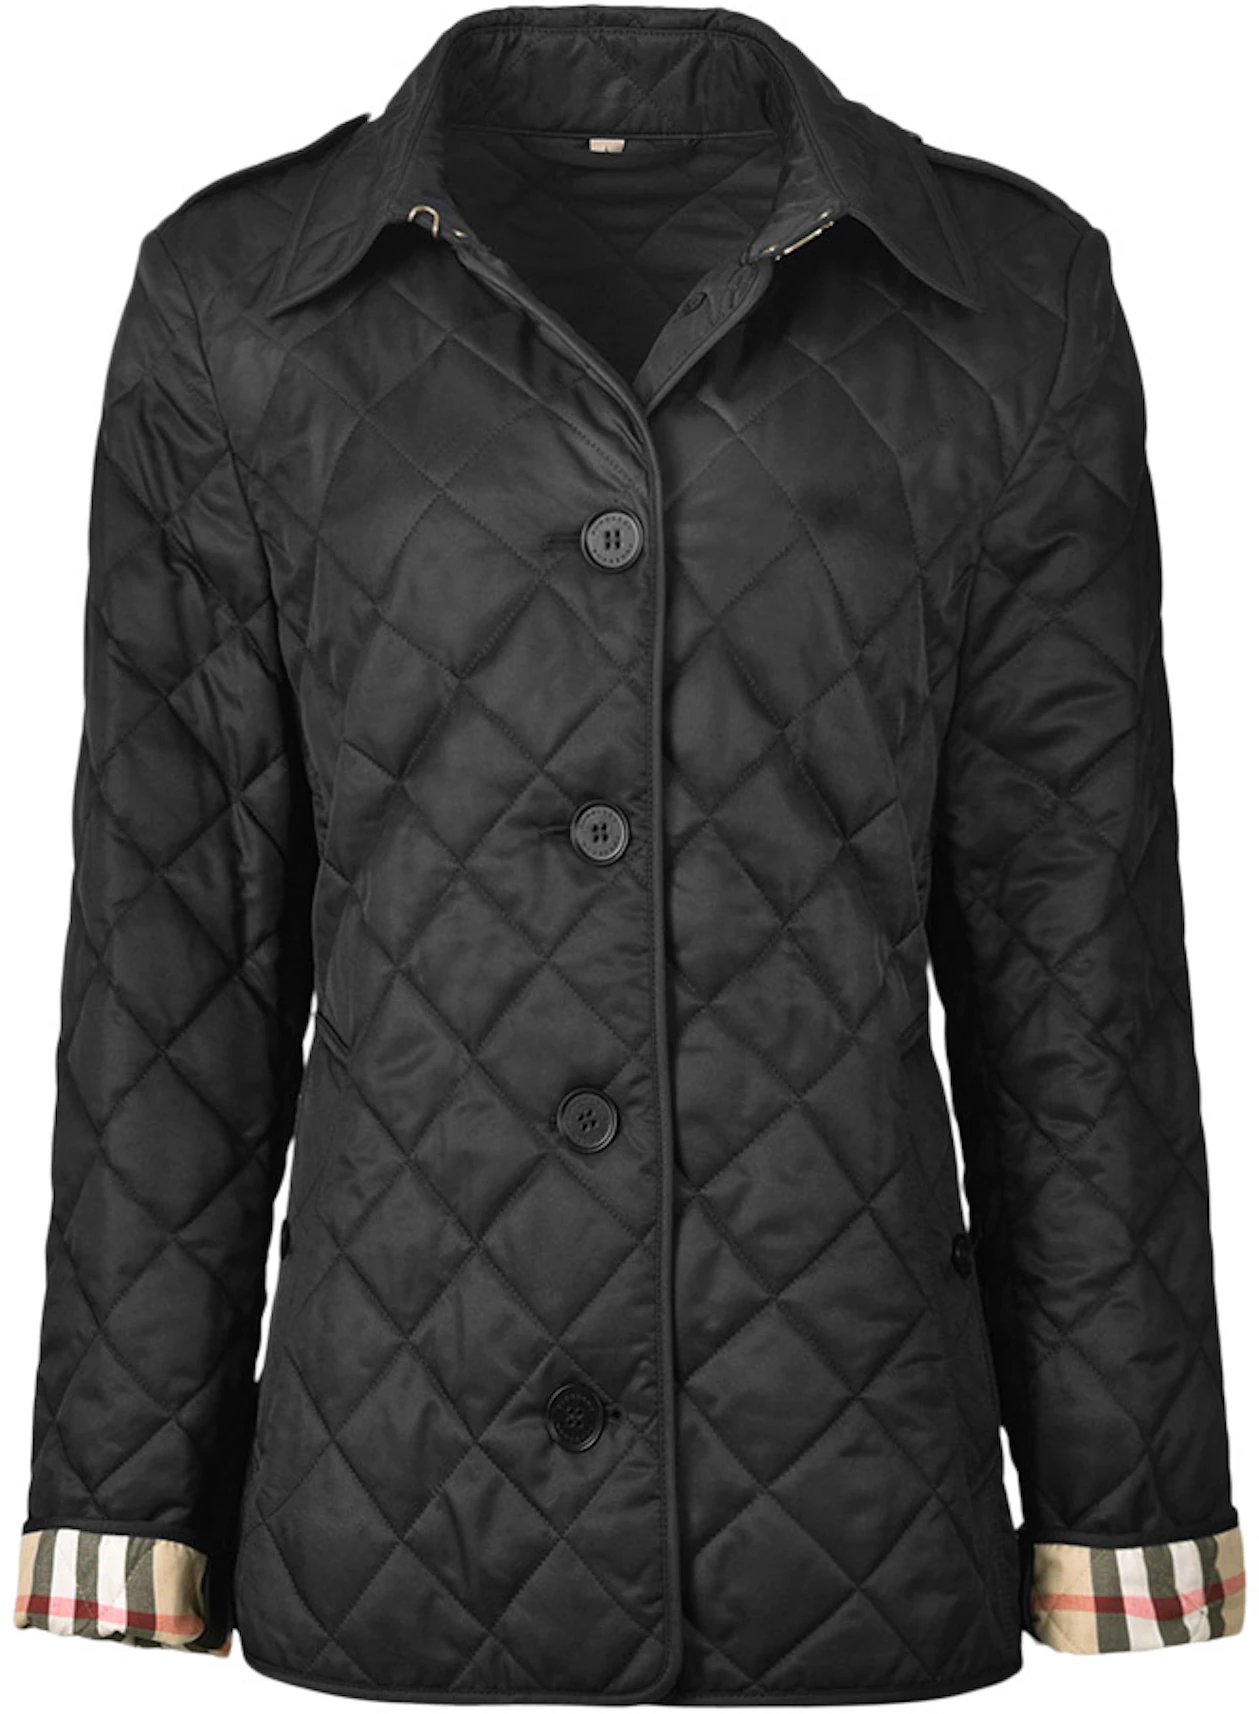 Burberry Diamond Quilted Jacket Black - US